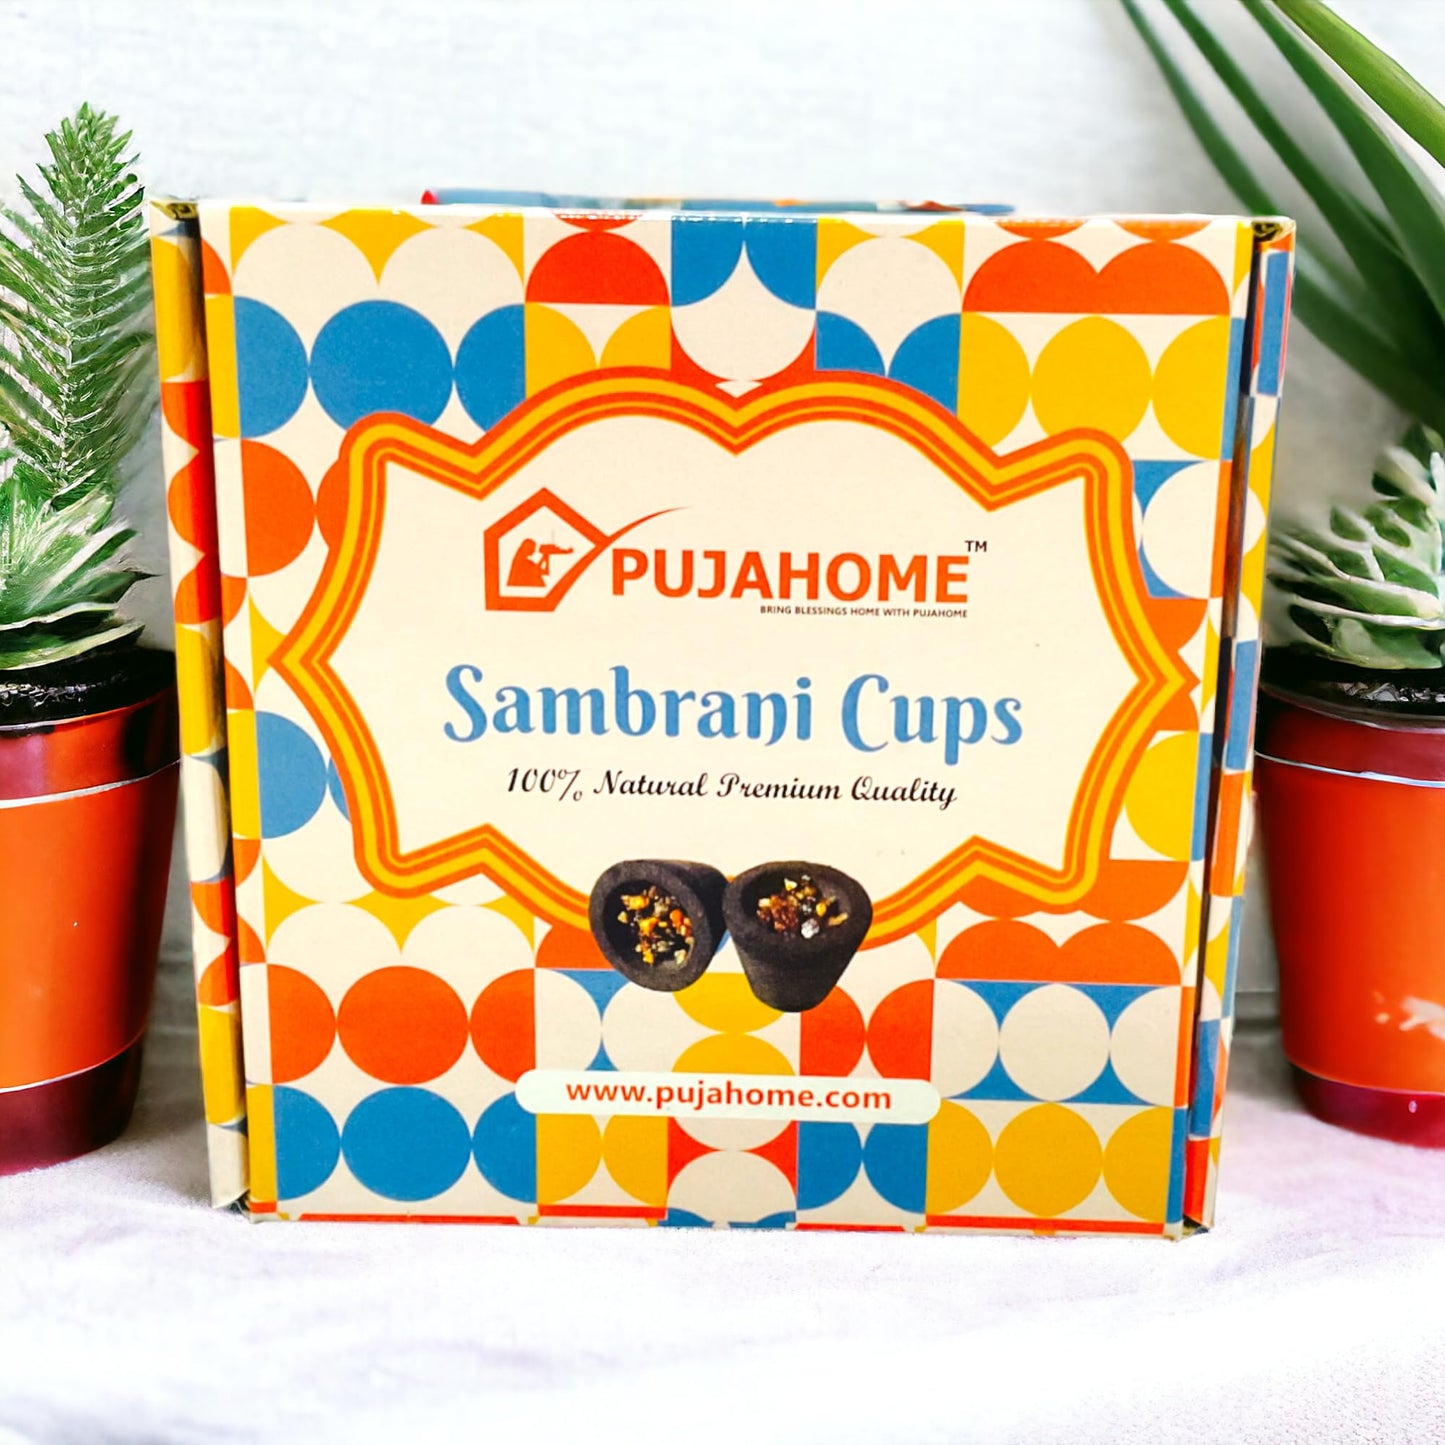 Pujahome Natural 4 in 1 Fragrance Pack Sambrani Cups for Puja/Home (12 Cups Per Pack + Free  Holder)